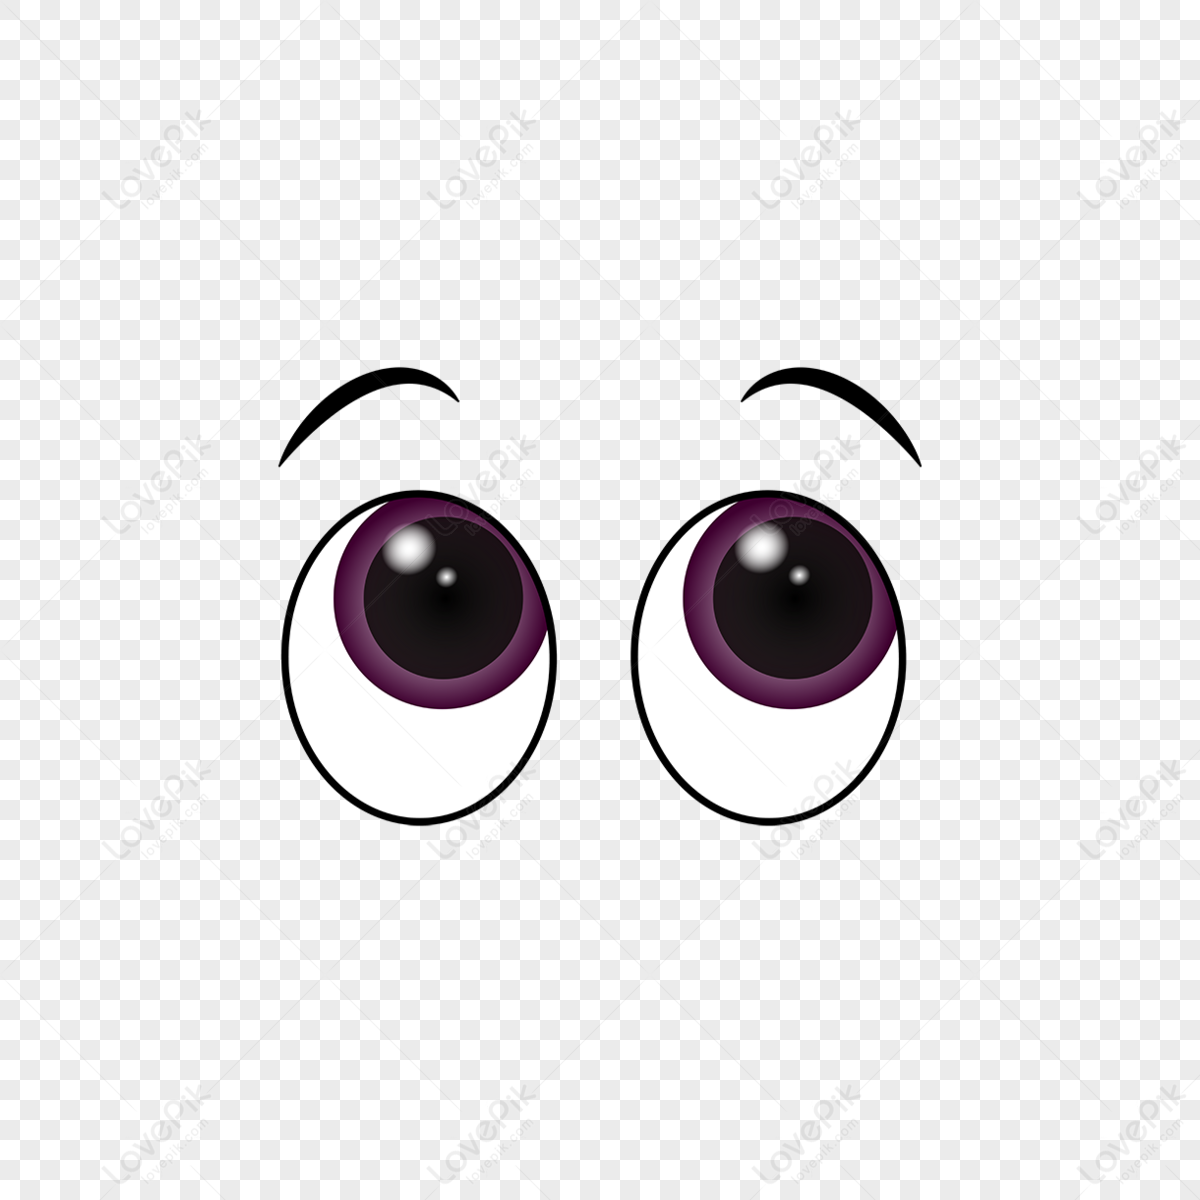 Brown cartoon eyes eyebrow expression vector material eyes clipart anime eyes png hd transparent image